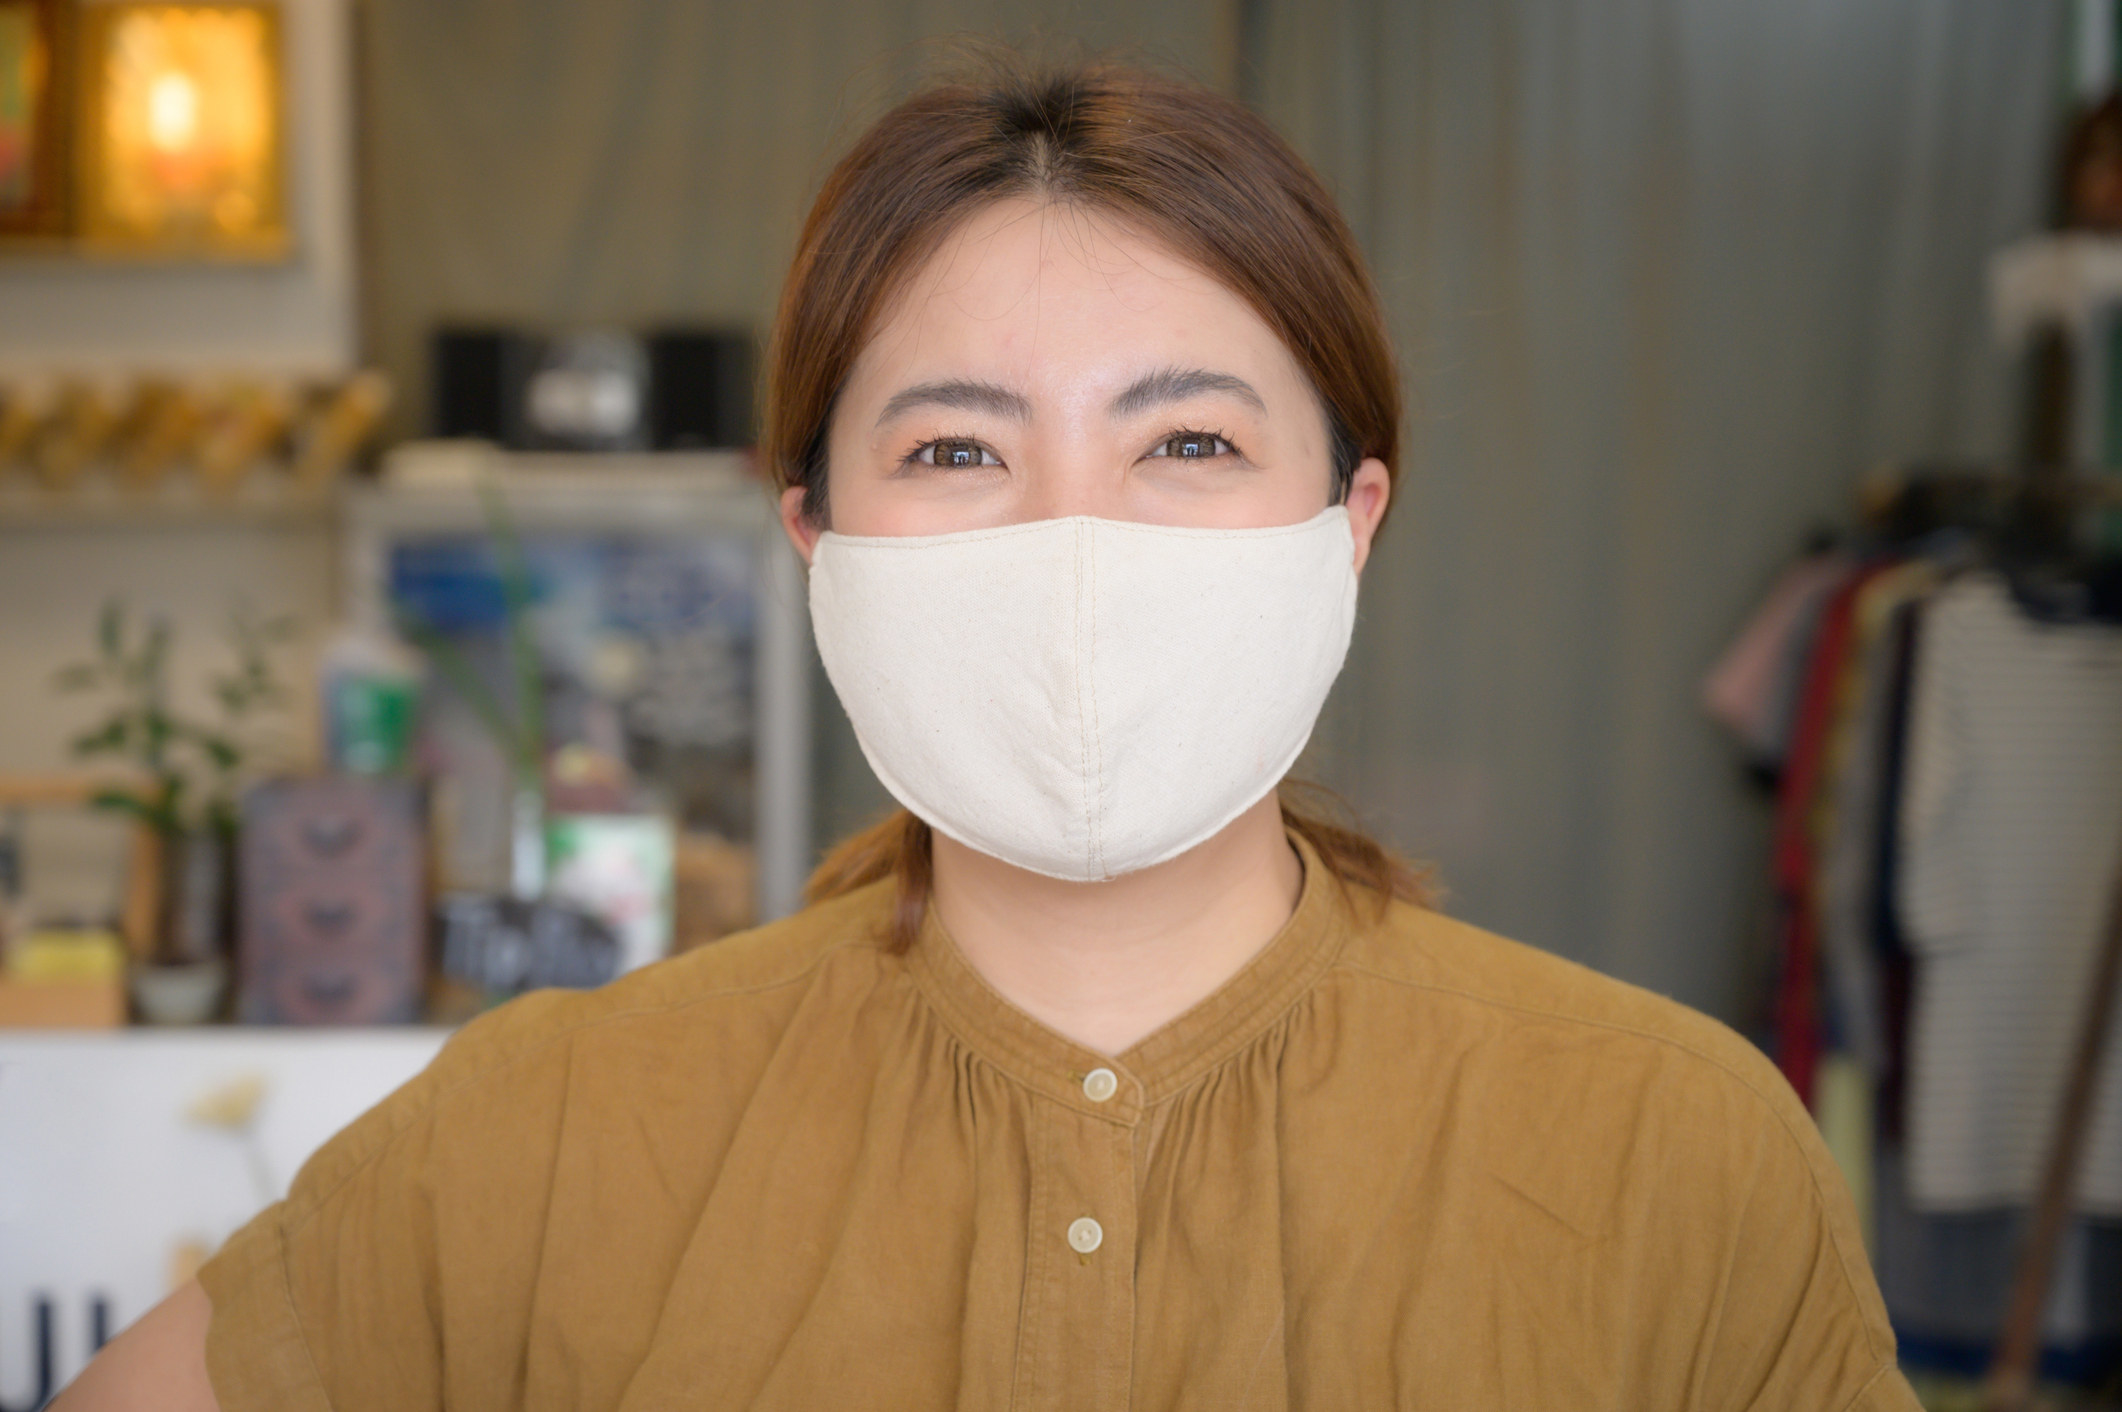 A person wearing a mock-neck shirt and smiling behind a simple neutral-toned mask